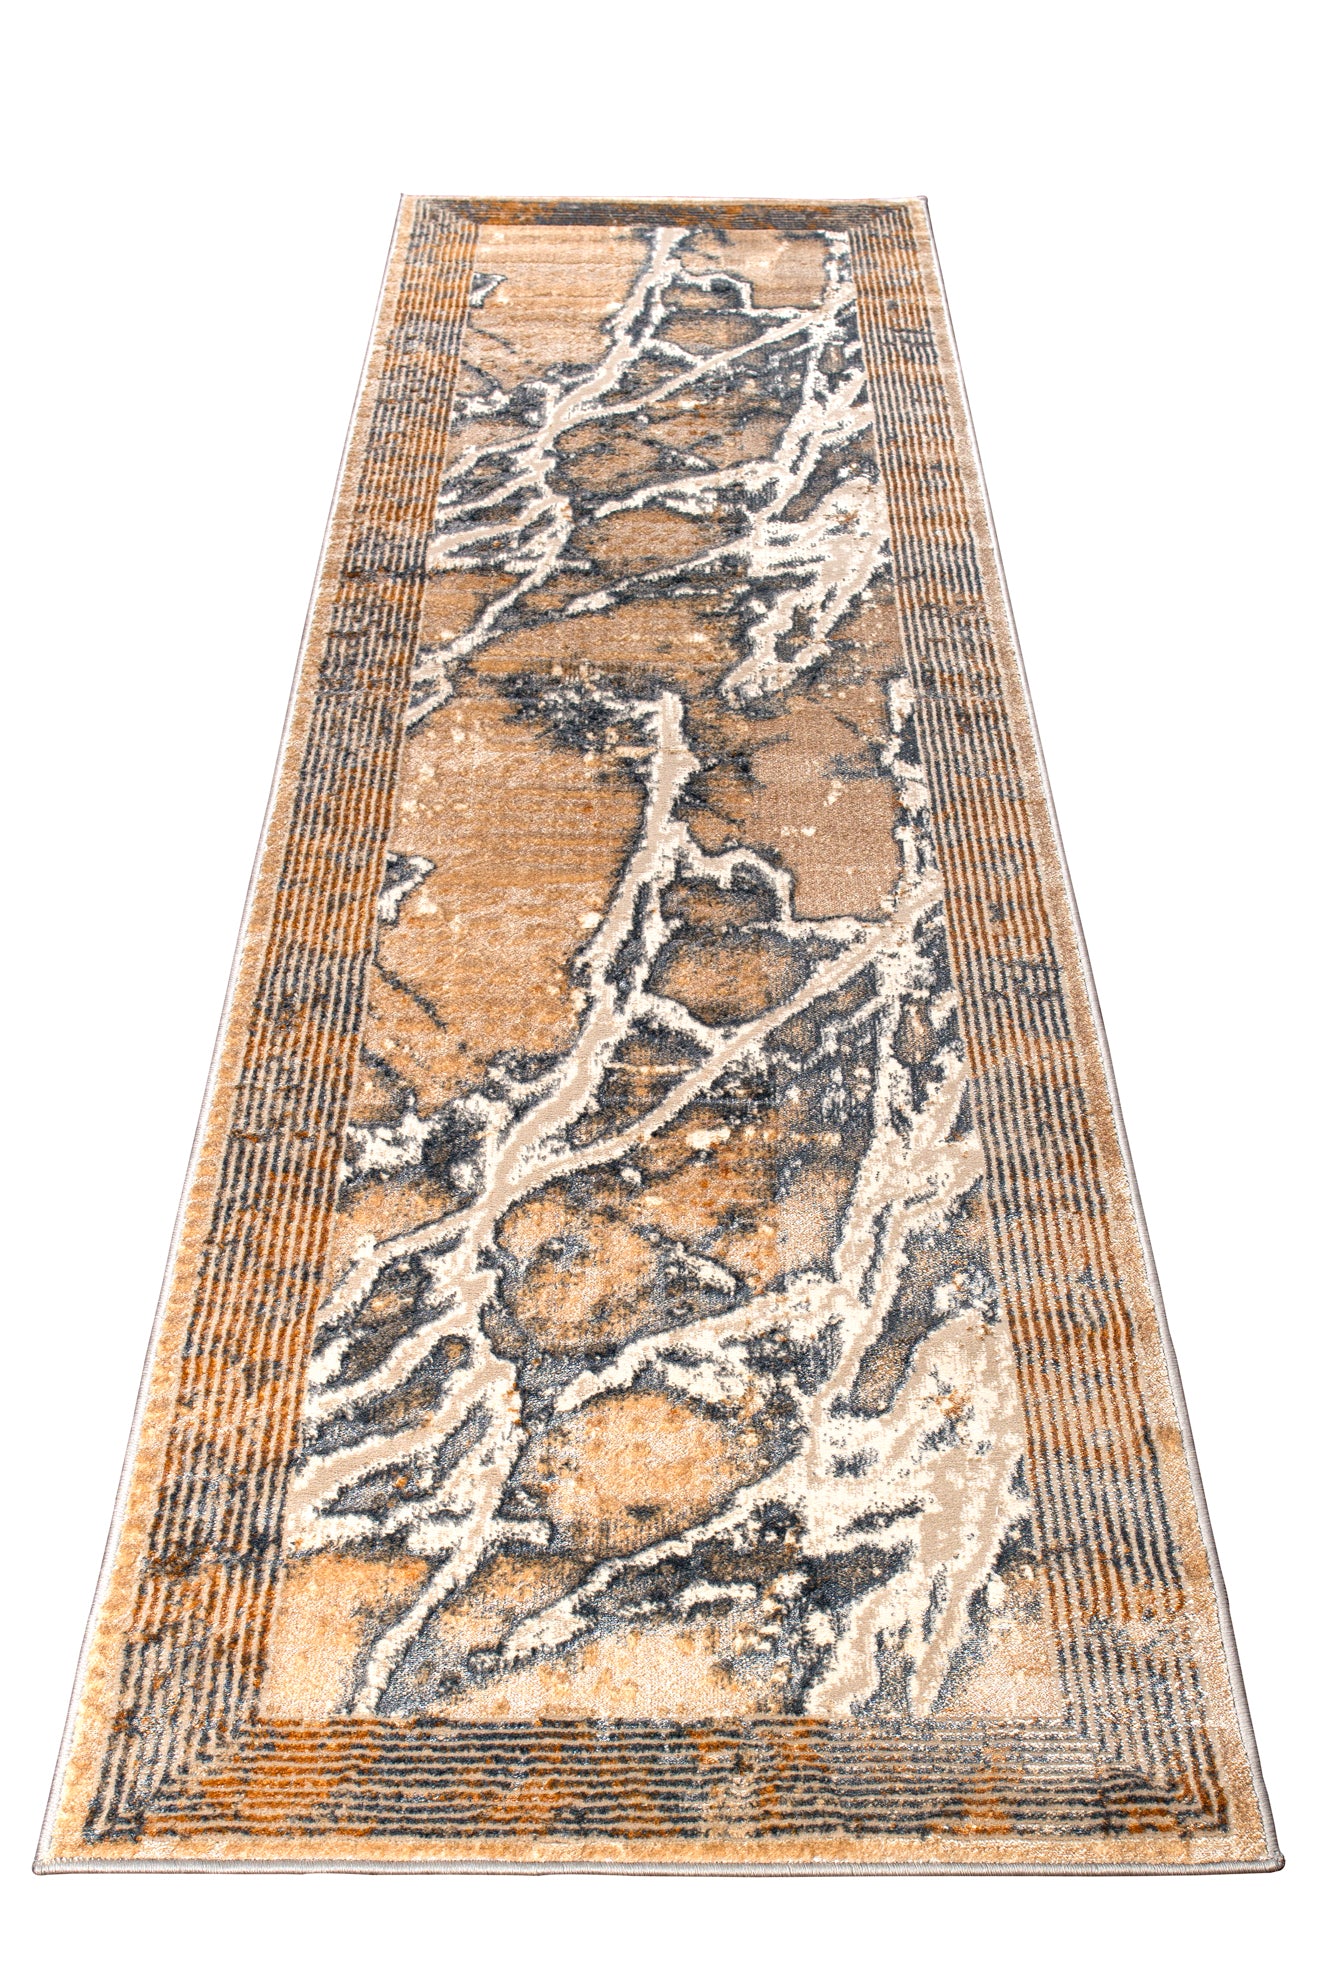 beige brown grey metalic abstract modern contemporary marble pattern bordered area rug 5x7, 5x8 ft Contemporary, Living Room Carpet, Bedroom, Home Office